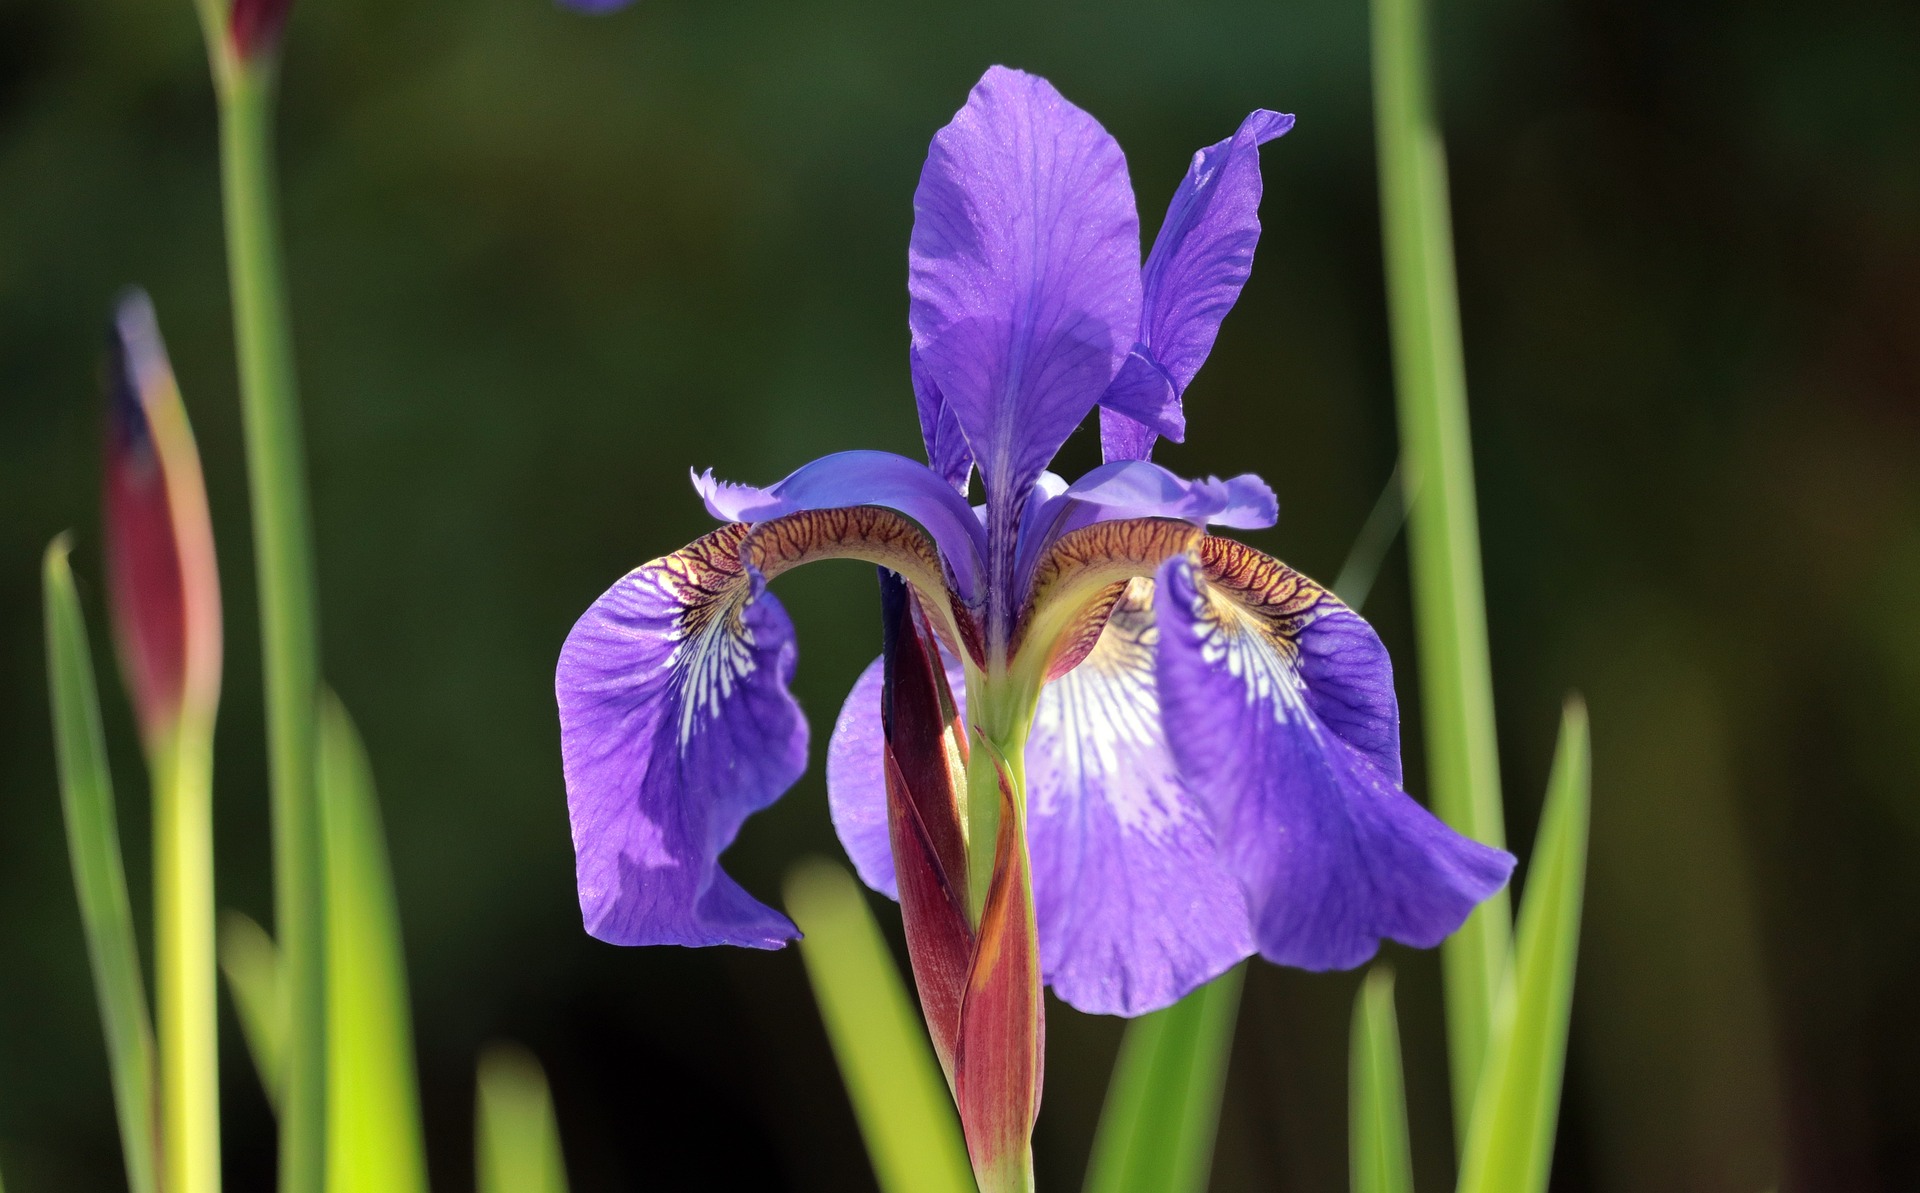 An iris flower blossoming during the day